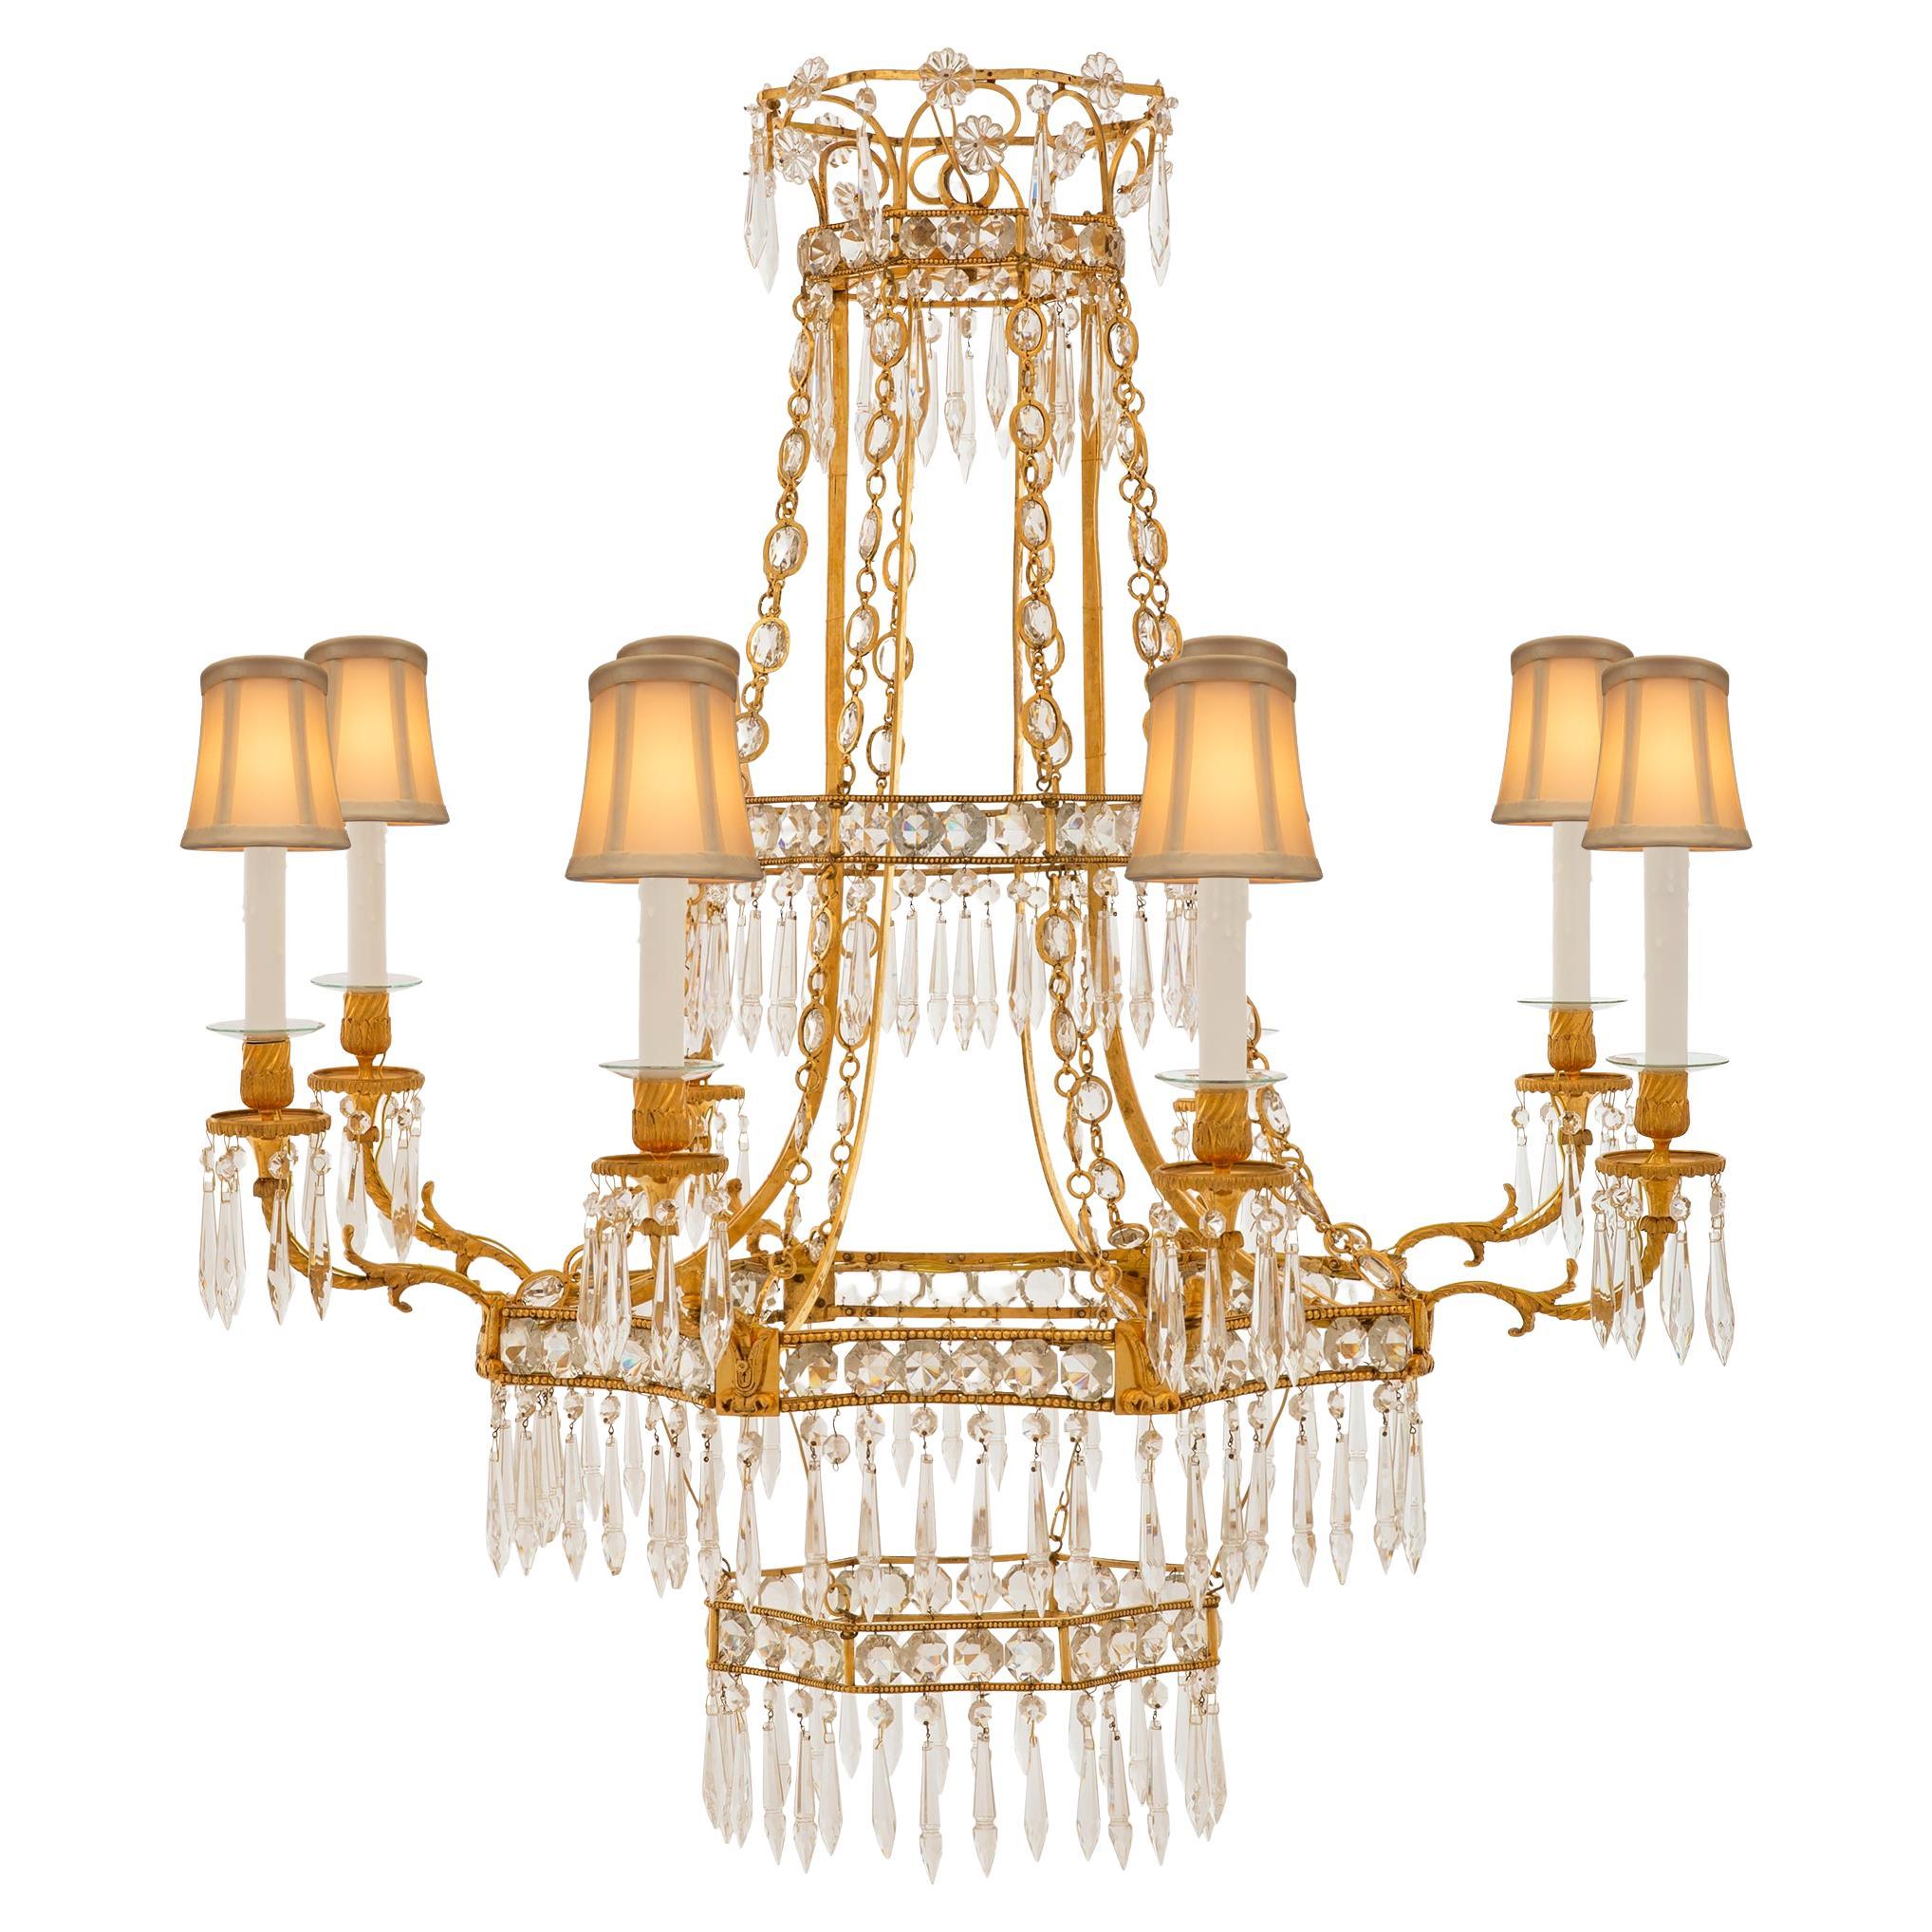 Baltic 19th Century Louis XVI St. Crystal And Ormolu Chandelier For Sale